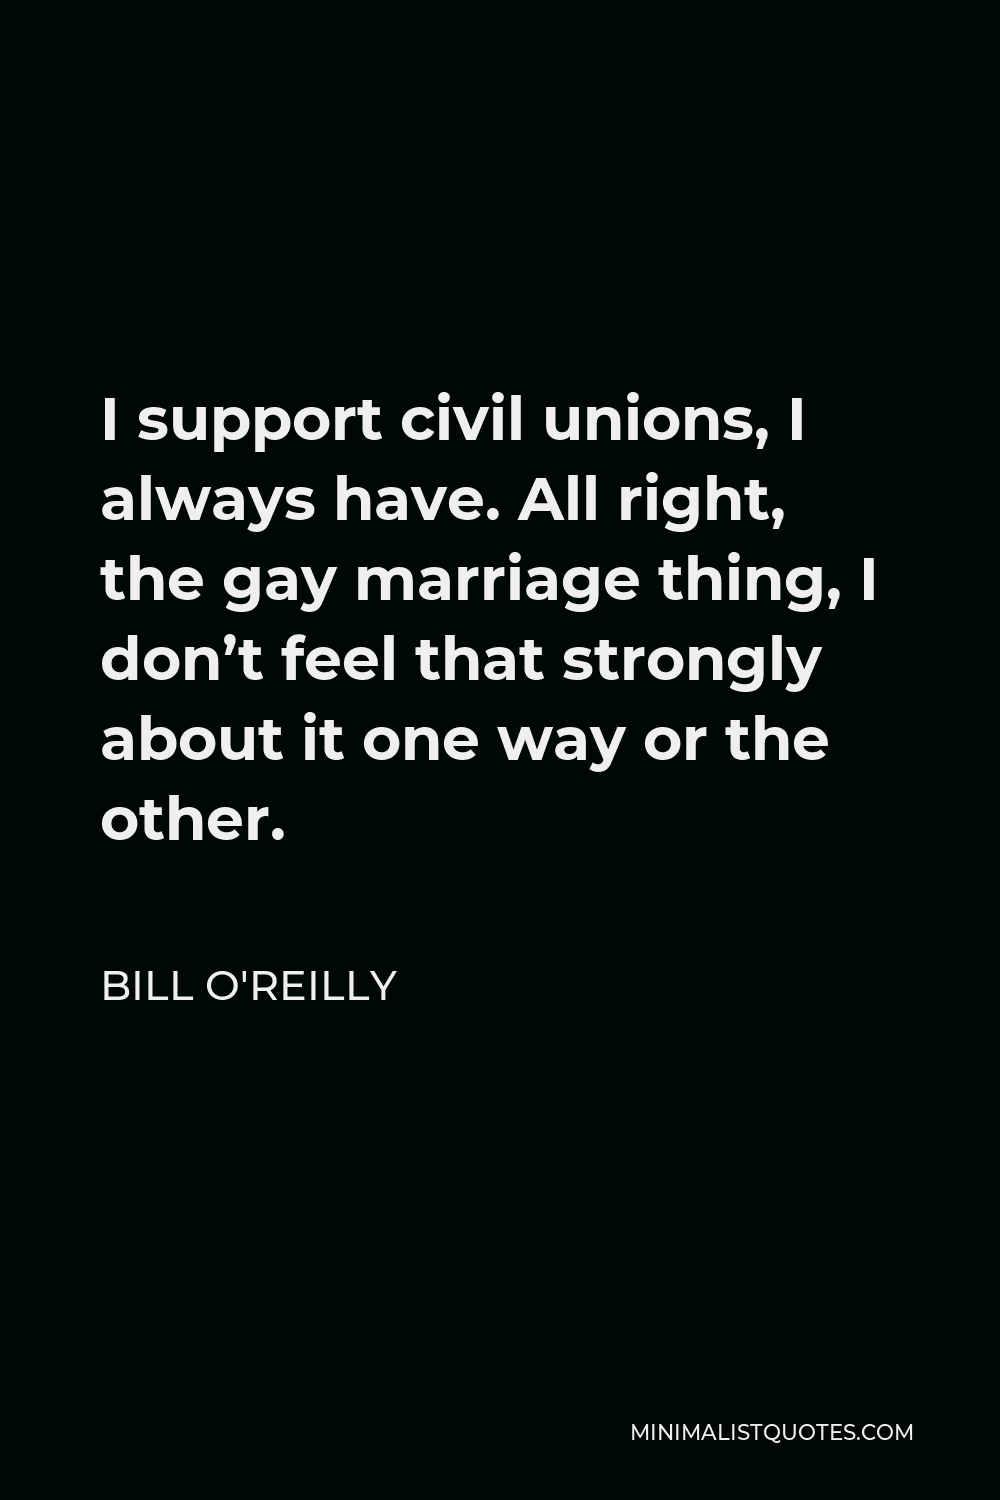 Bill O'Reilly Quote - I support civil unions, I always have. All right, the gay marriage thing, I don’t feel that strongly about it one way or the other.